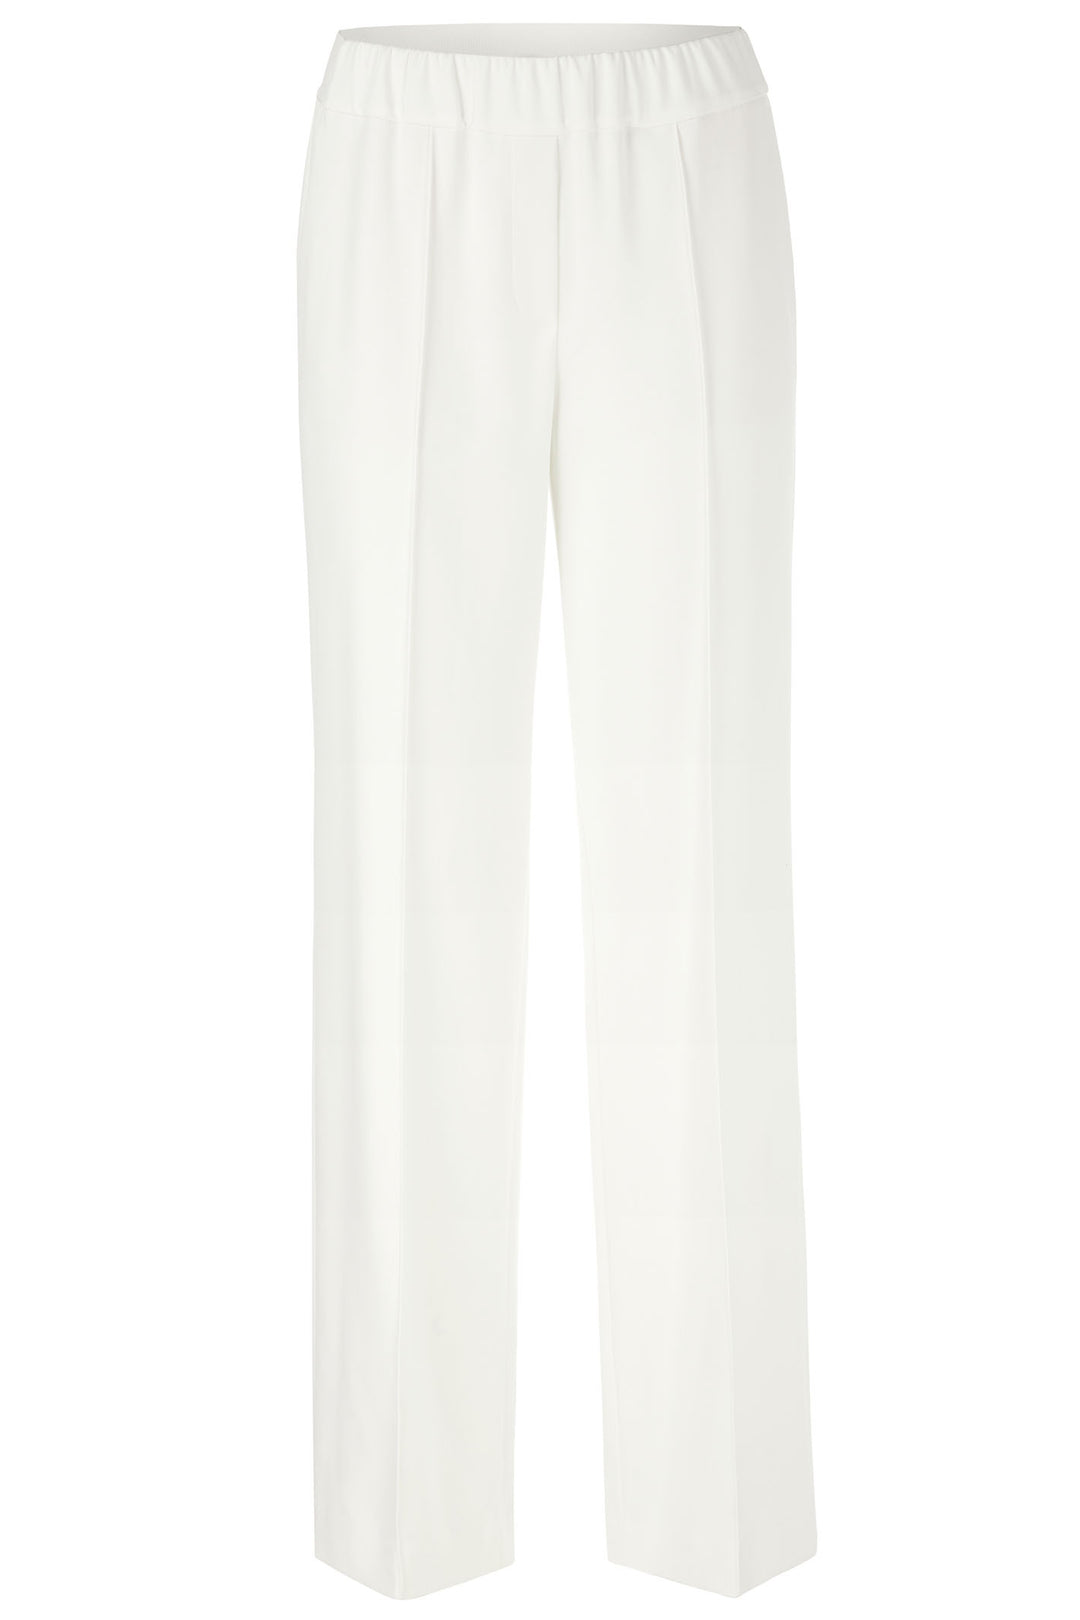 Marc Cain Collection WC 81.17 W56 110 Off White Washington Trousers - Olivia Grace Fashion